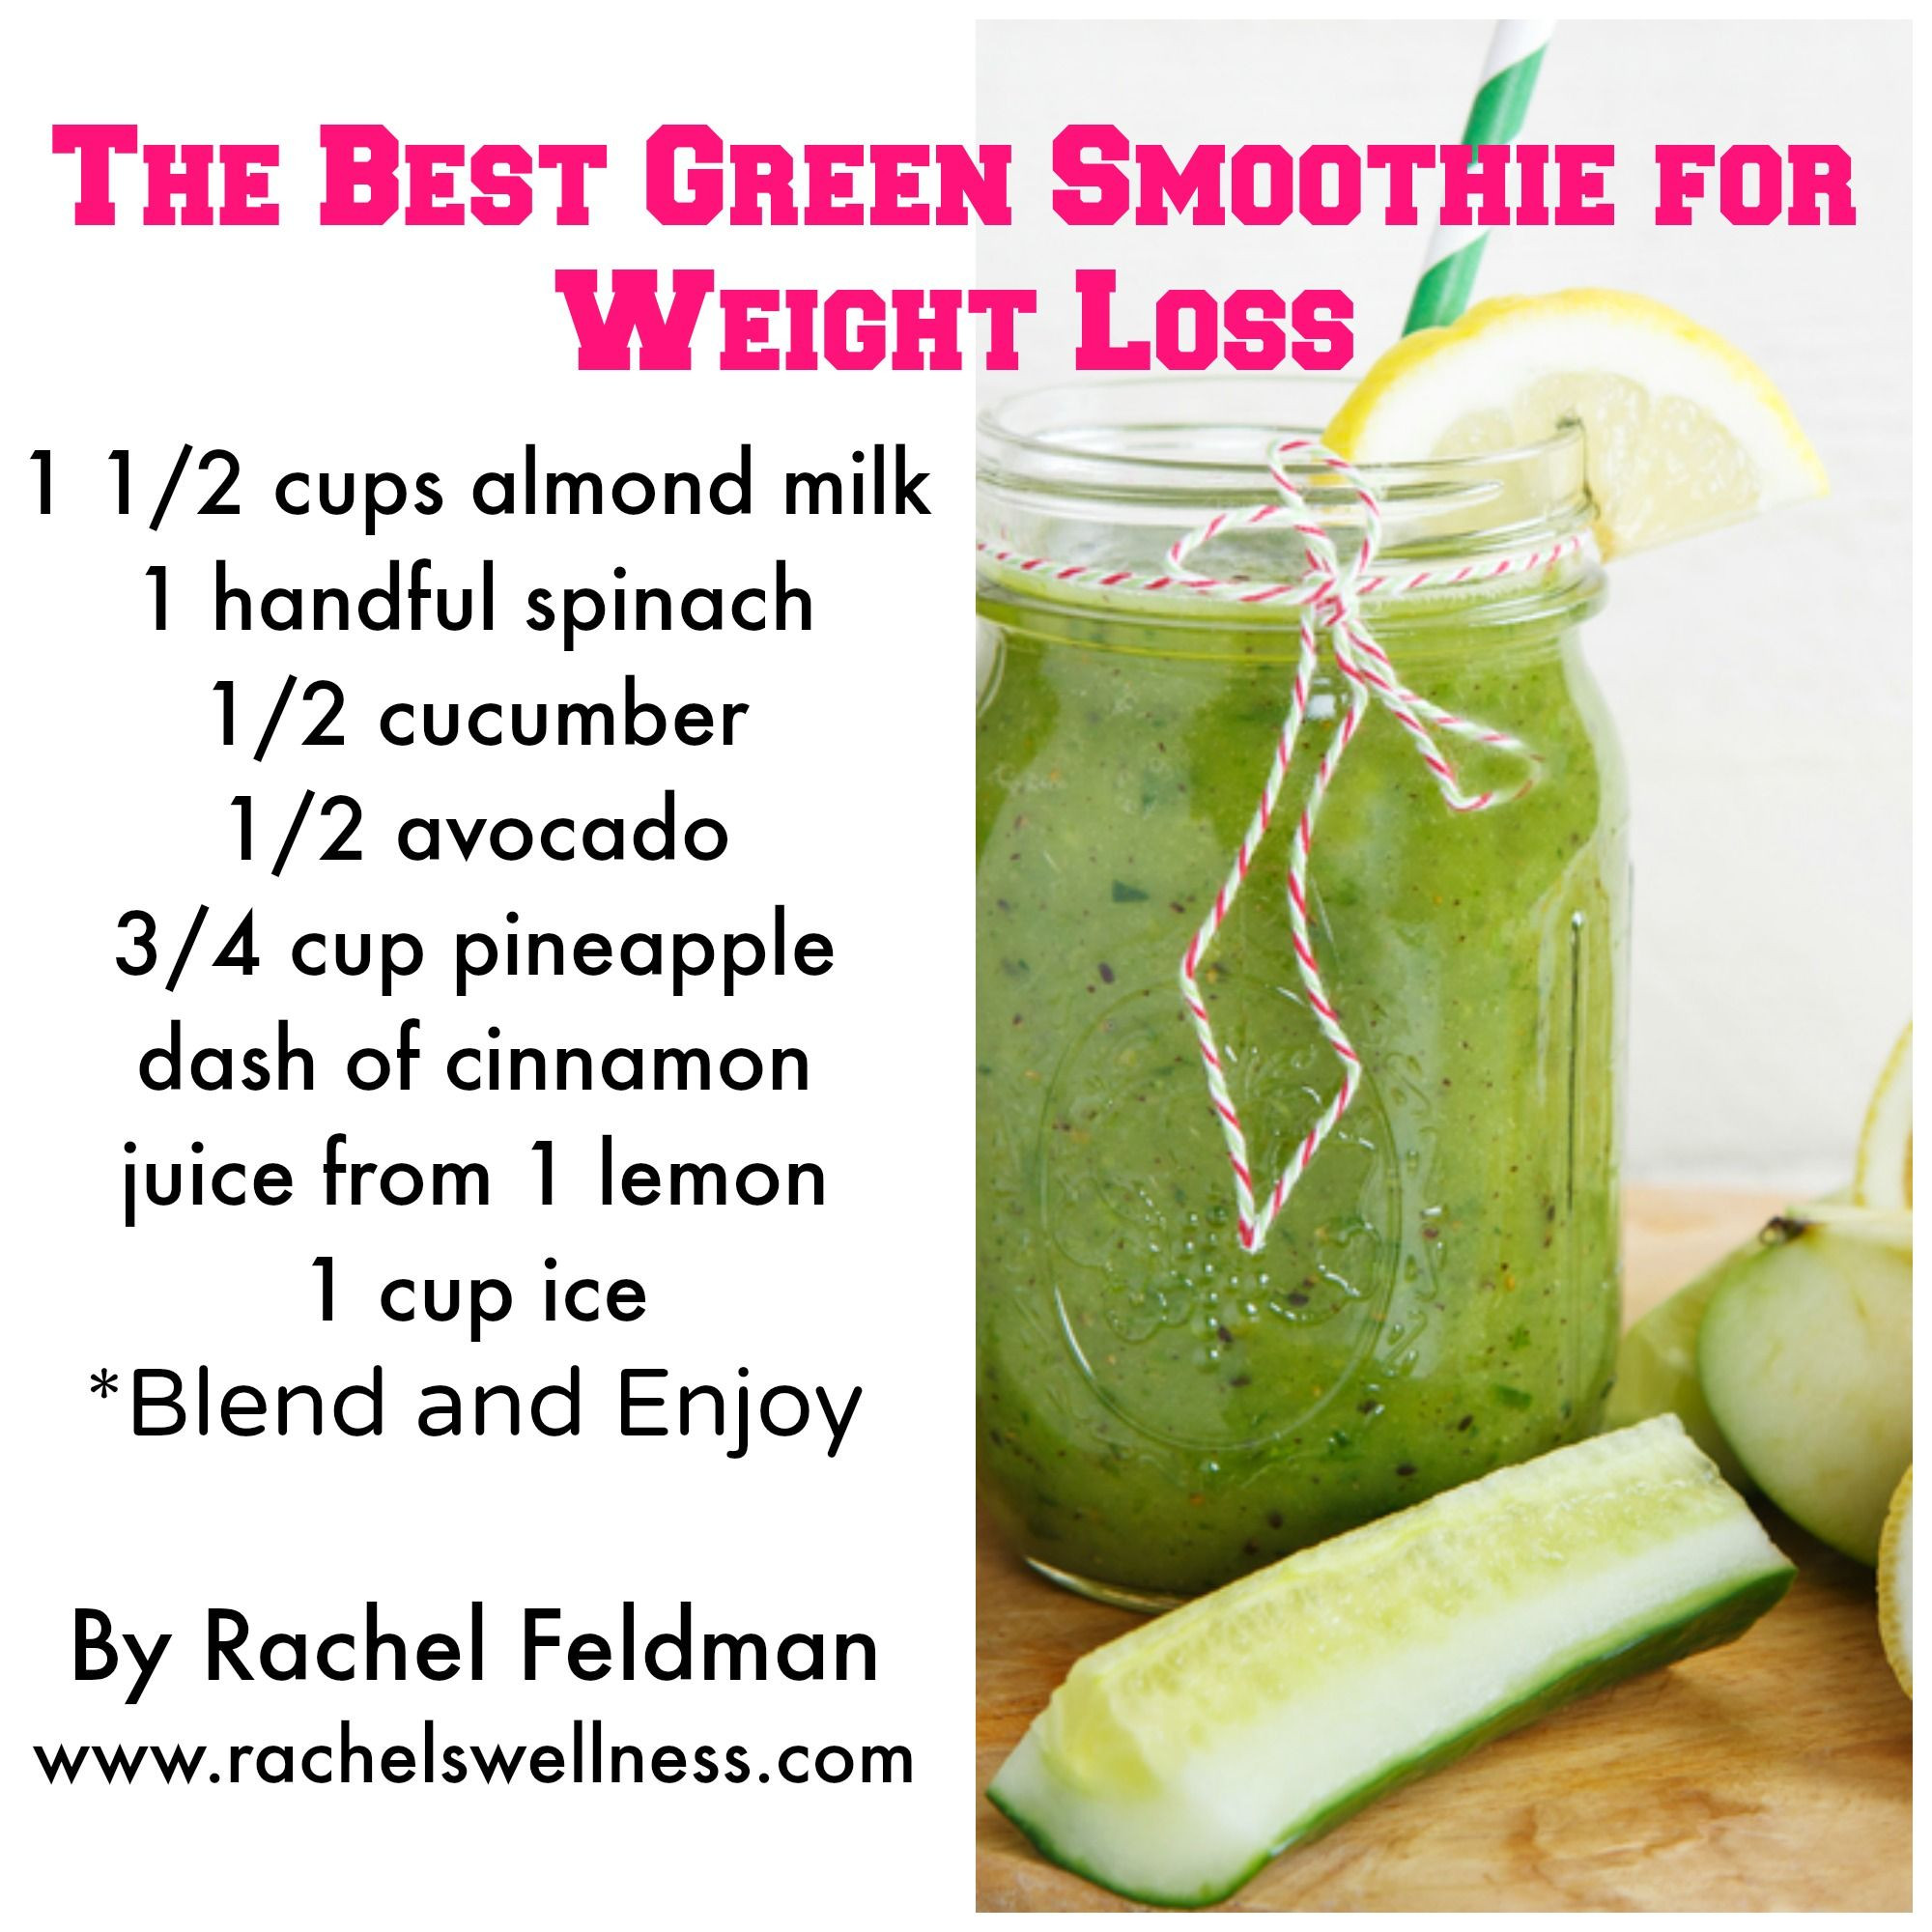 Best Fruit Smoothies For Weight Loss
 7 Healthy Green Smoothie Recipes For Weight Loss